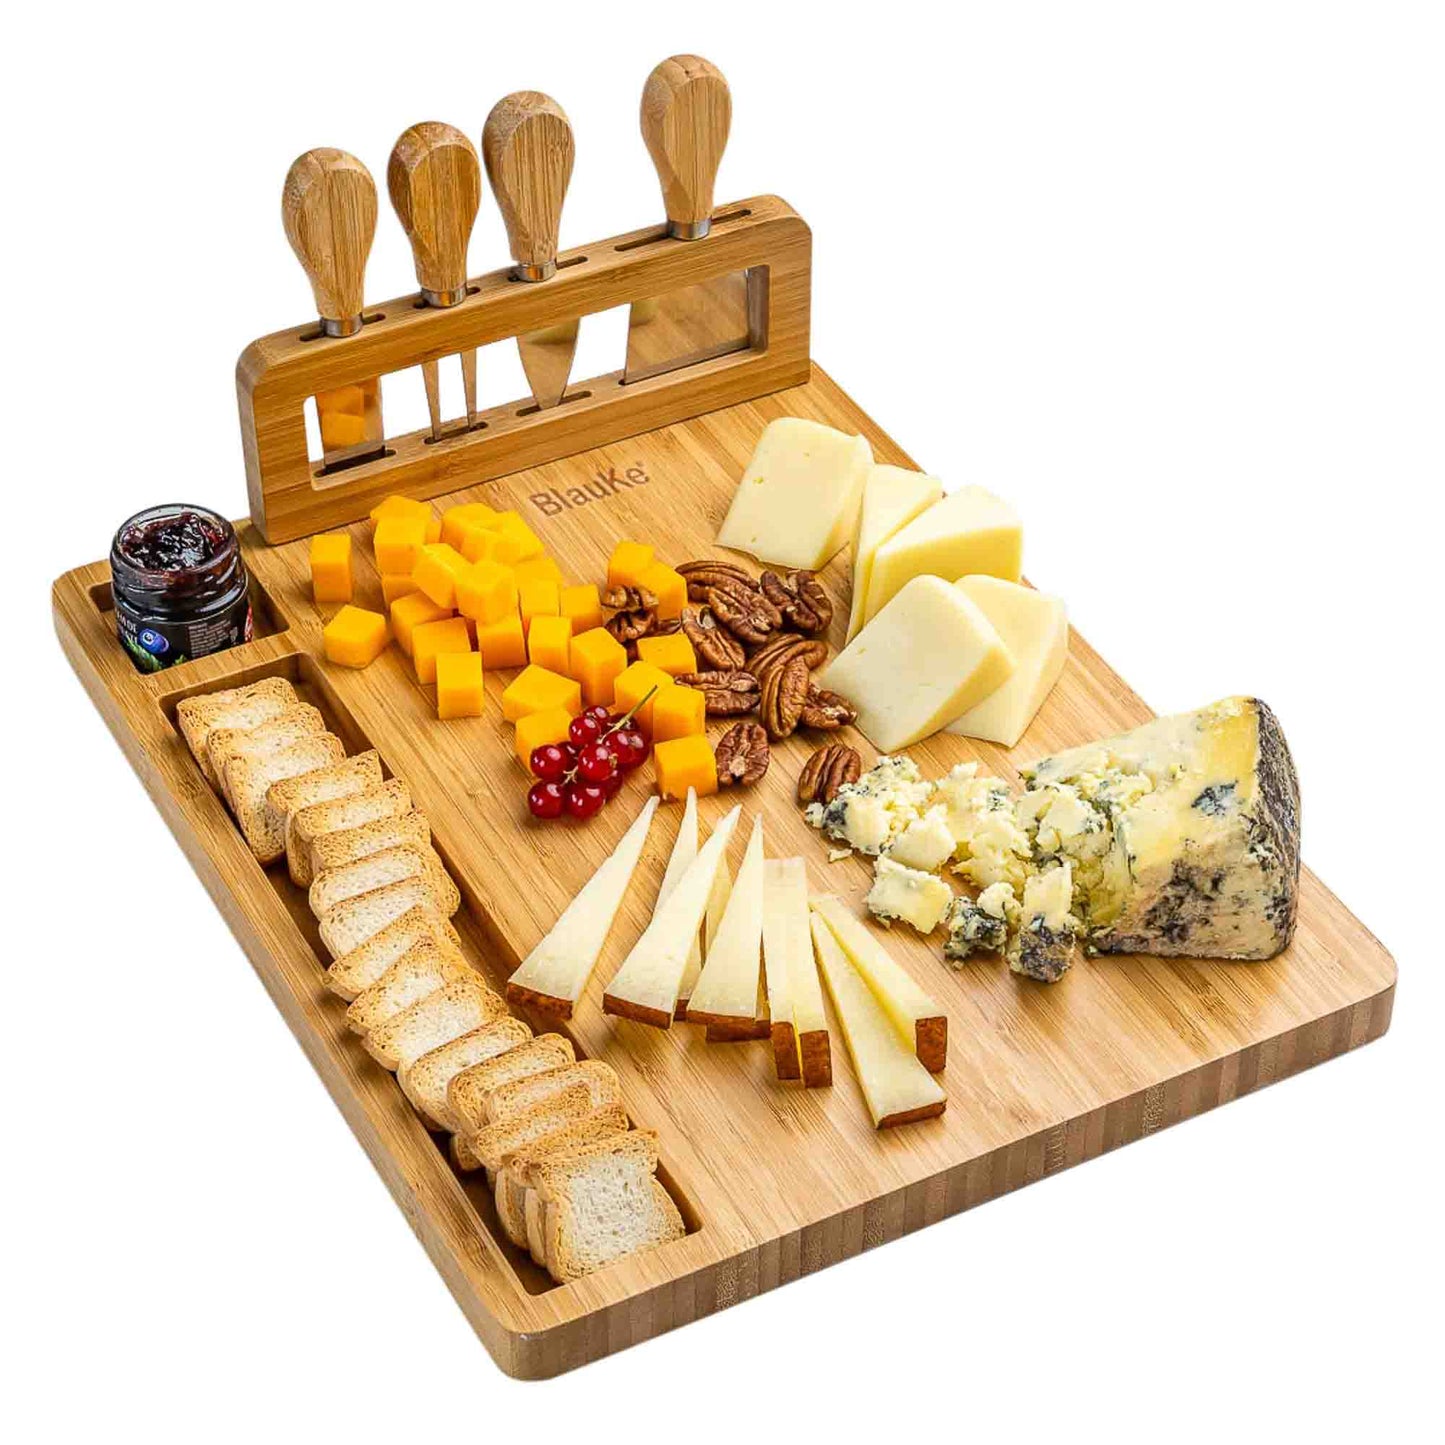 Bamboo Cheese Board and Knife Set - 14x11 inch Charcuterie Board with 4 Cheese Knives - Wood Serving Tray-0